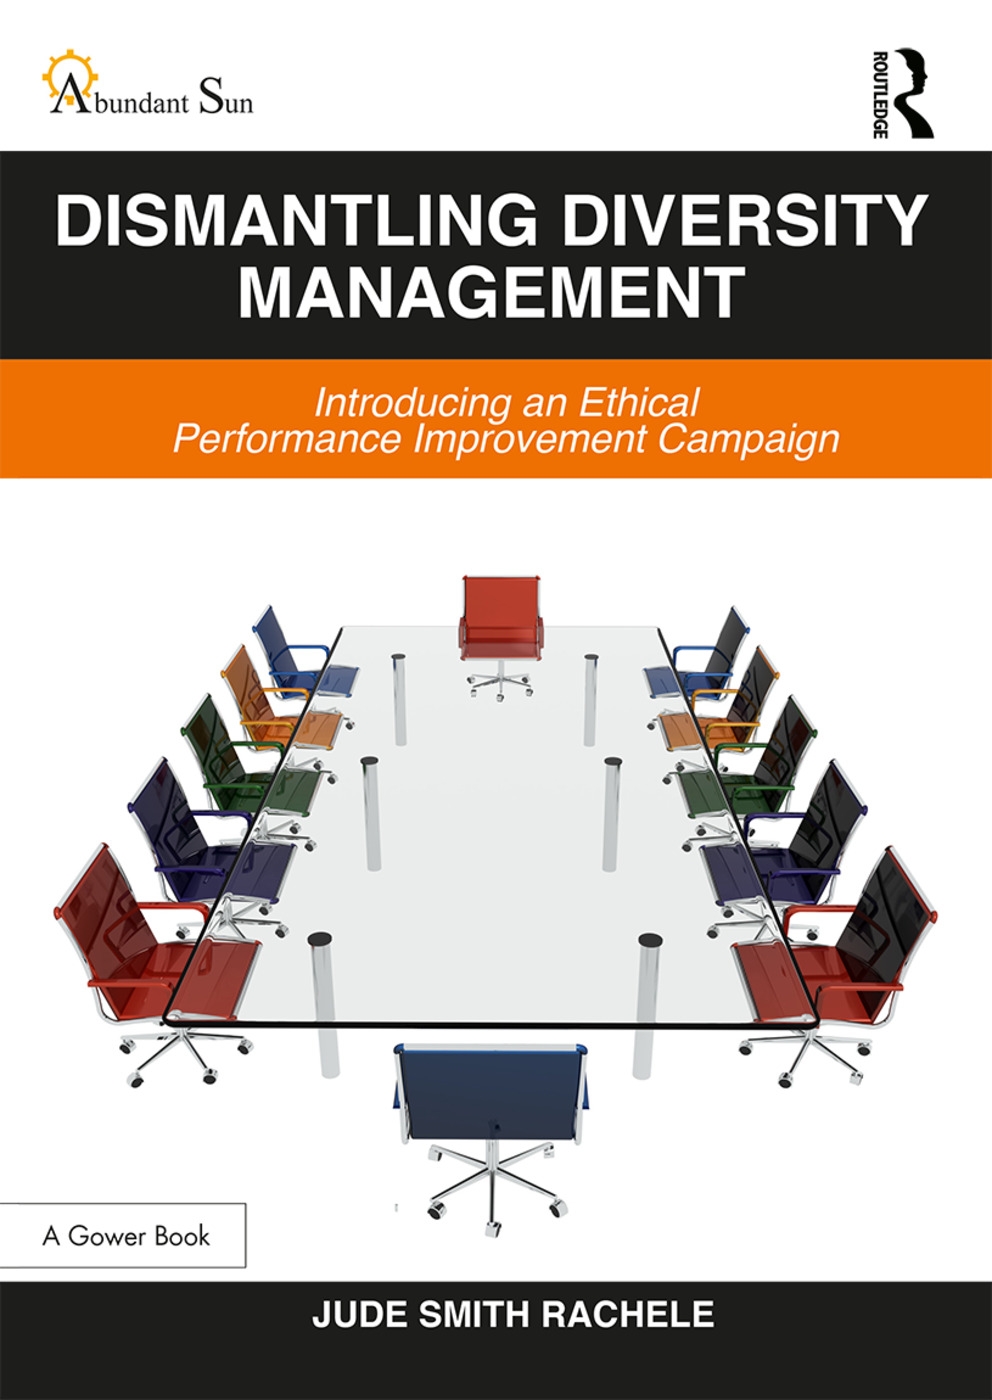 Dismantling Diversity Management: Introducing an Ethical Performance Improvement Campaign